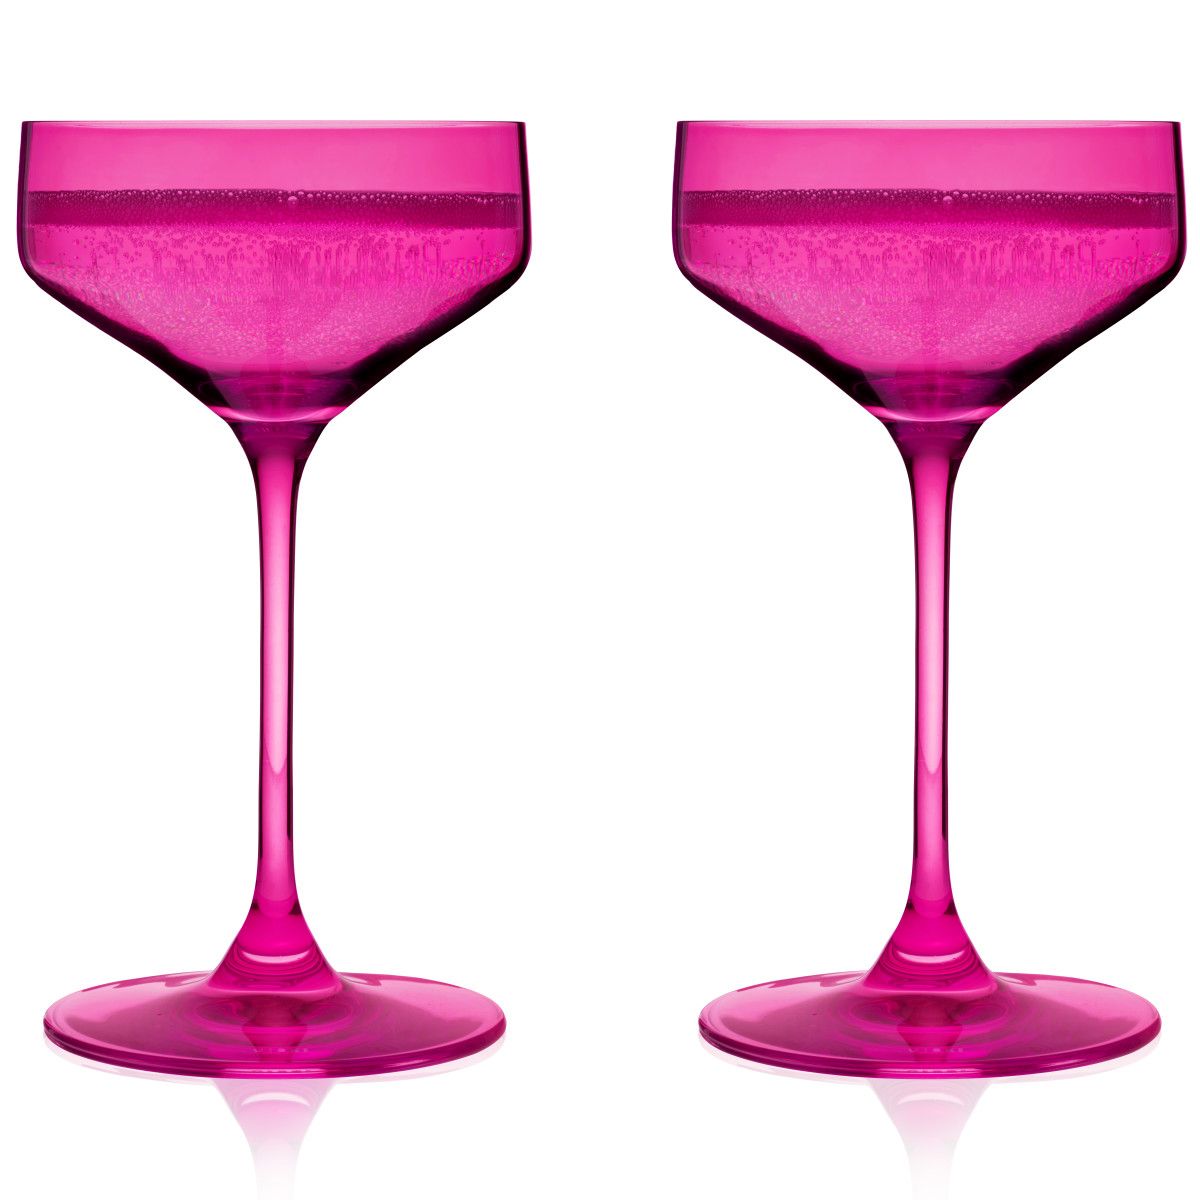 CRYSTAL COUPES BERRY